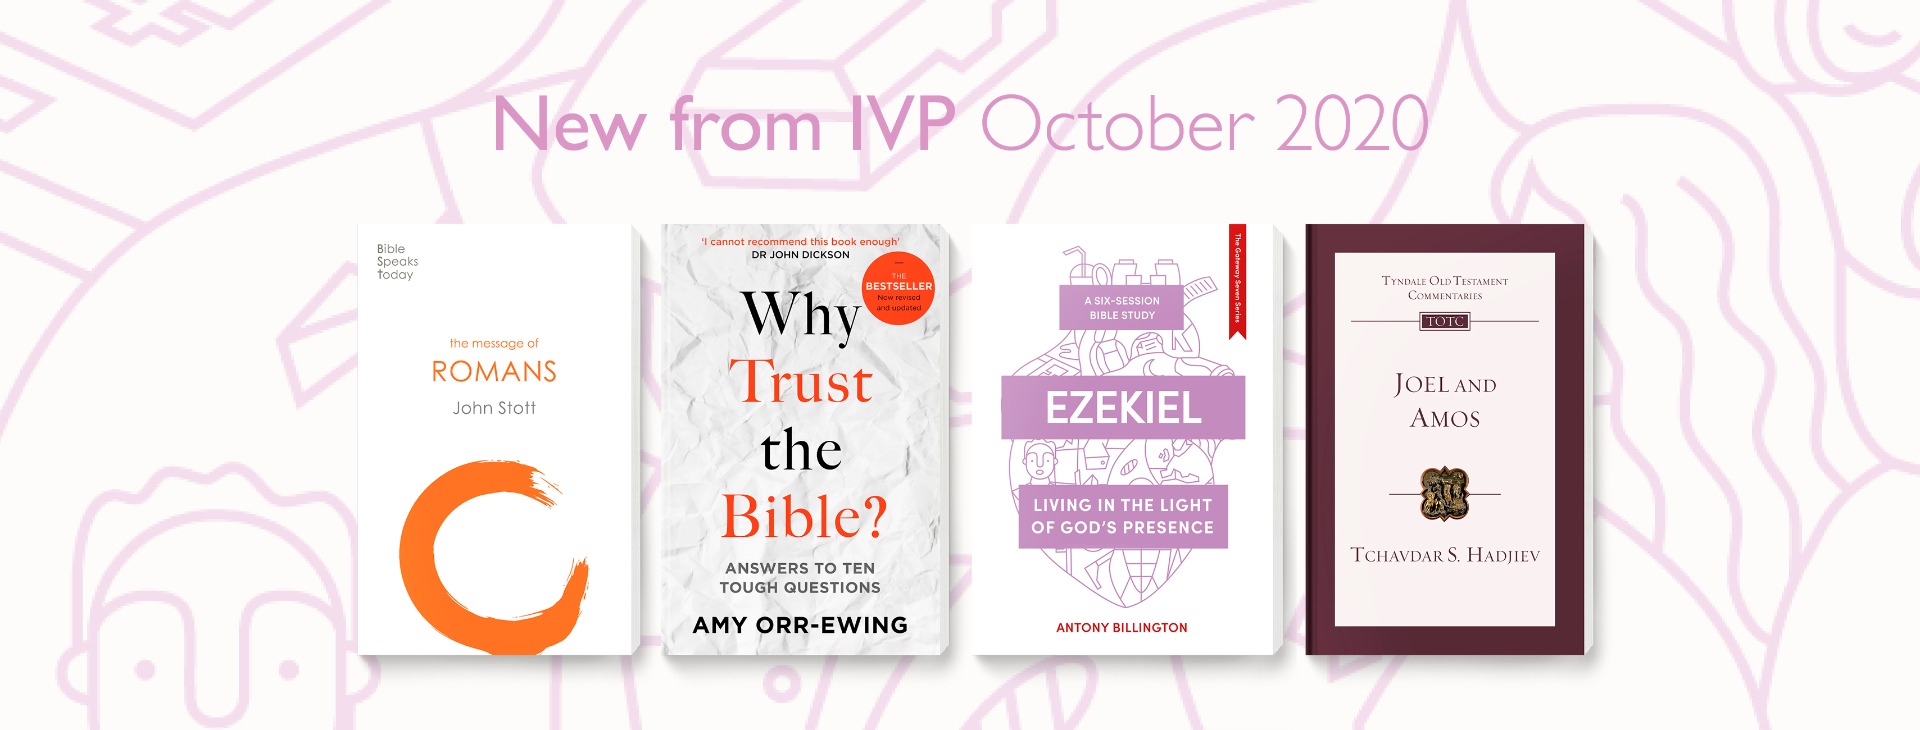 The IVP October 2020 Releases